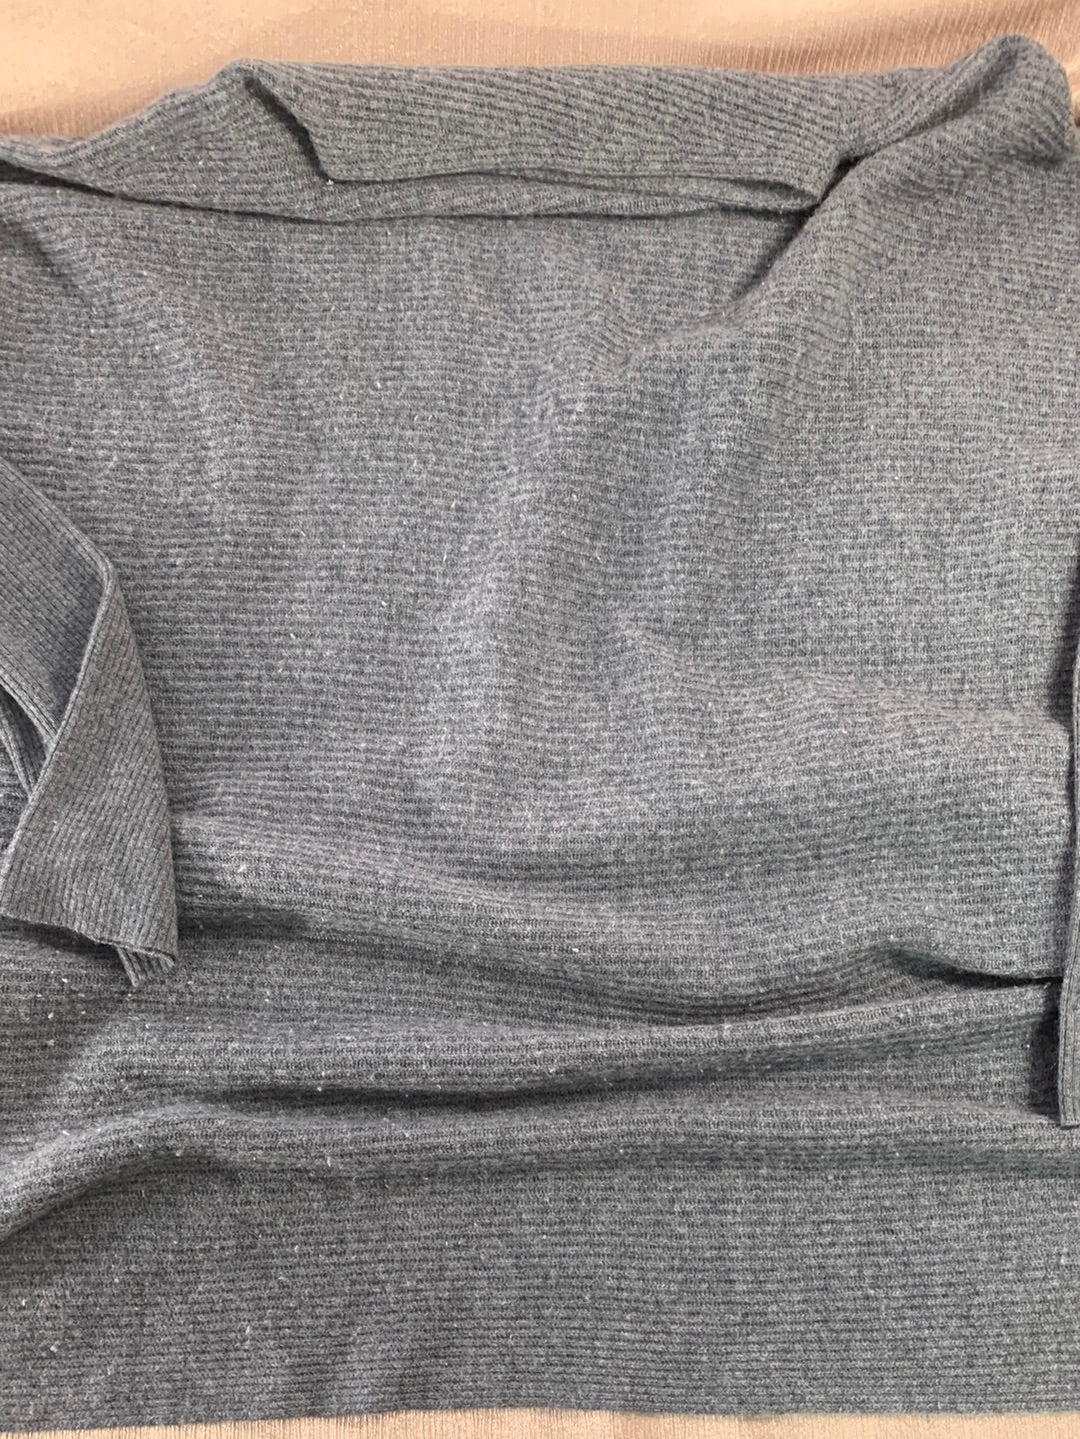 LOT OF 3 CASHMERE Sweater Upcycle Felt Craft Cutters Fabric - green tan gray